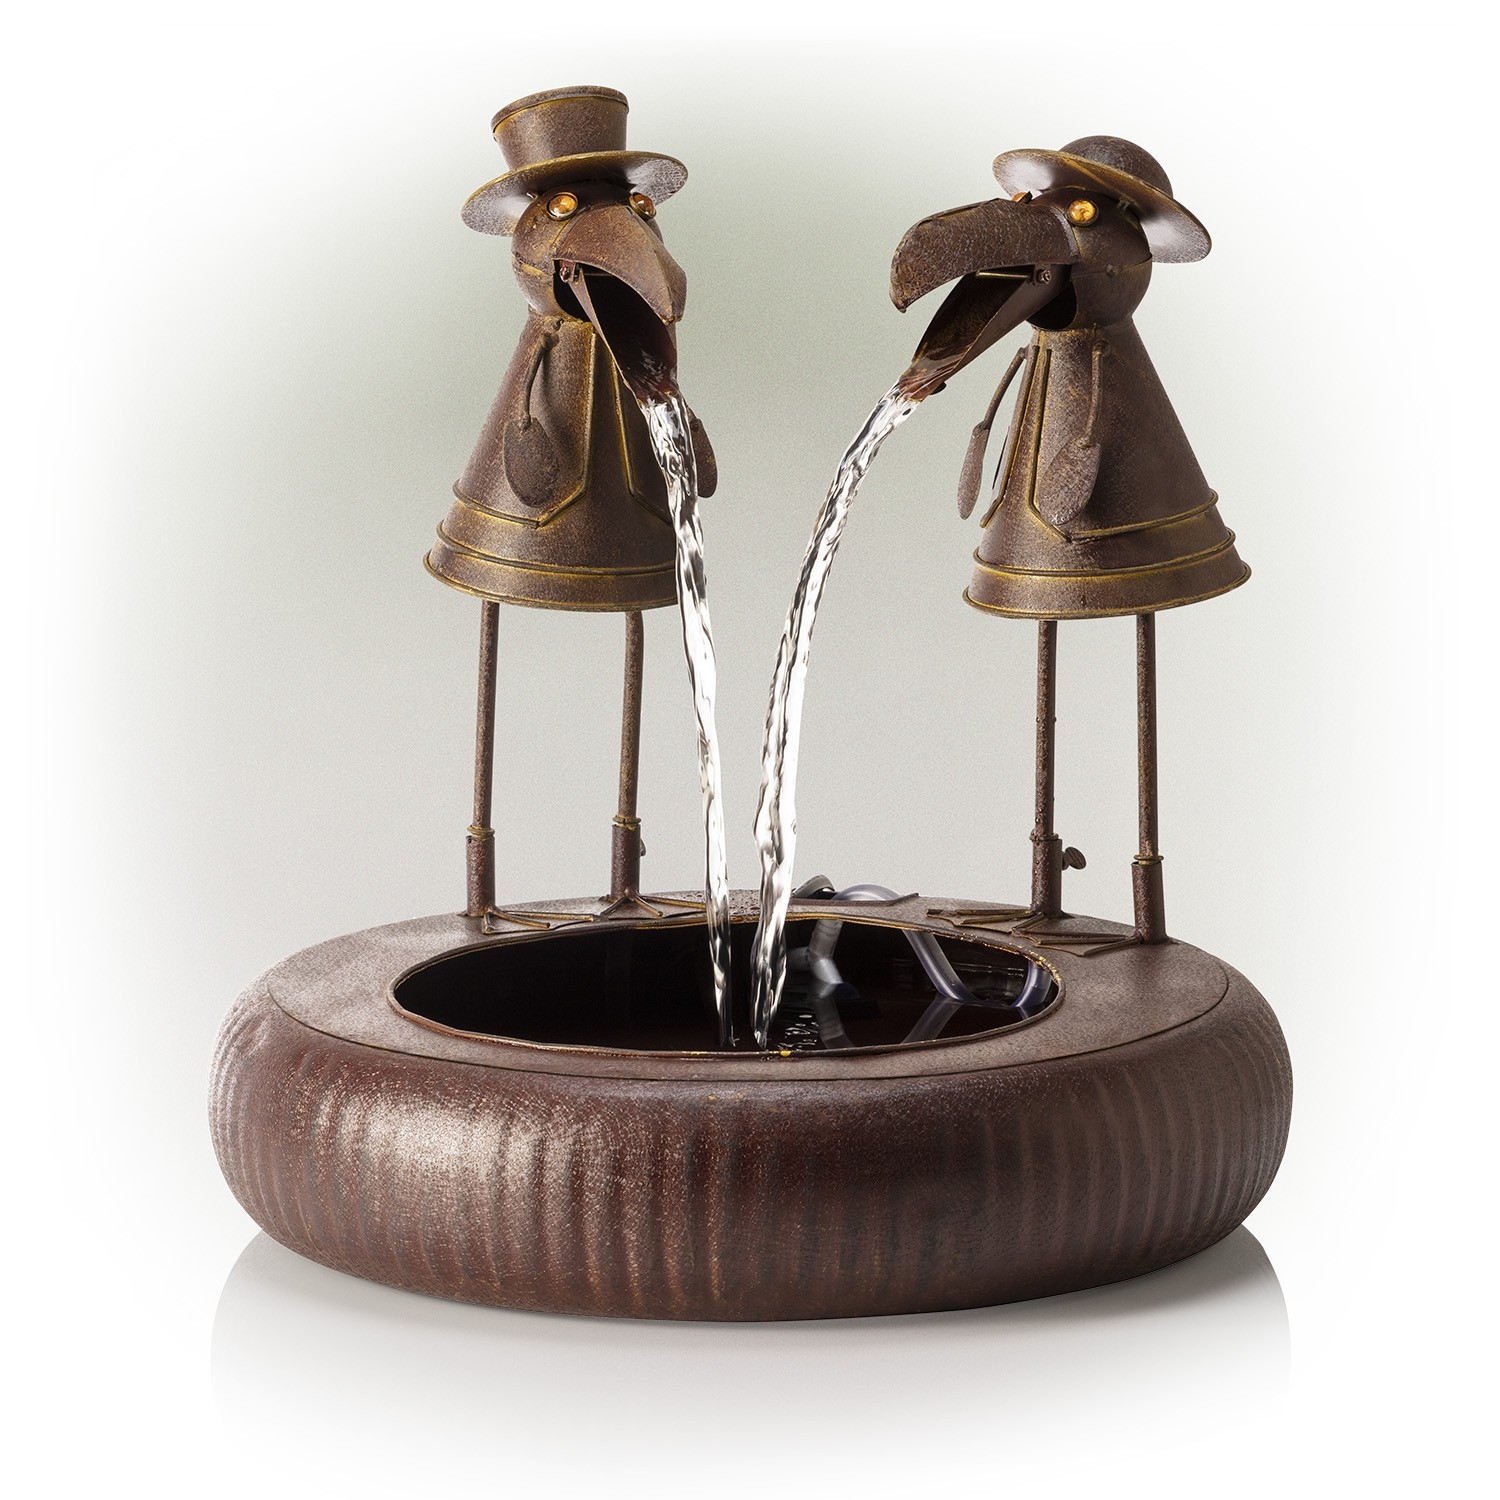 20" Toucans in Suits Metallic Fountain with Rustic Finish